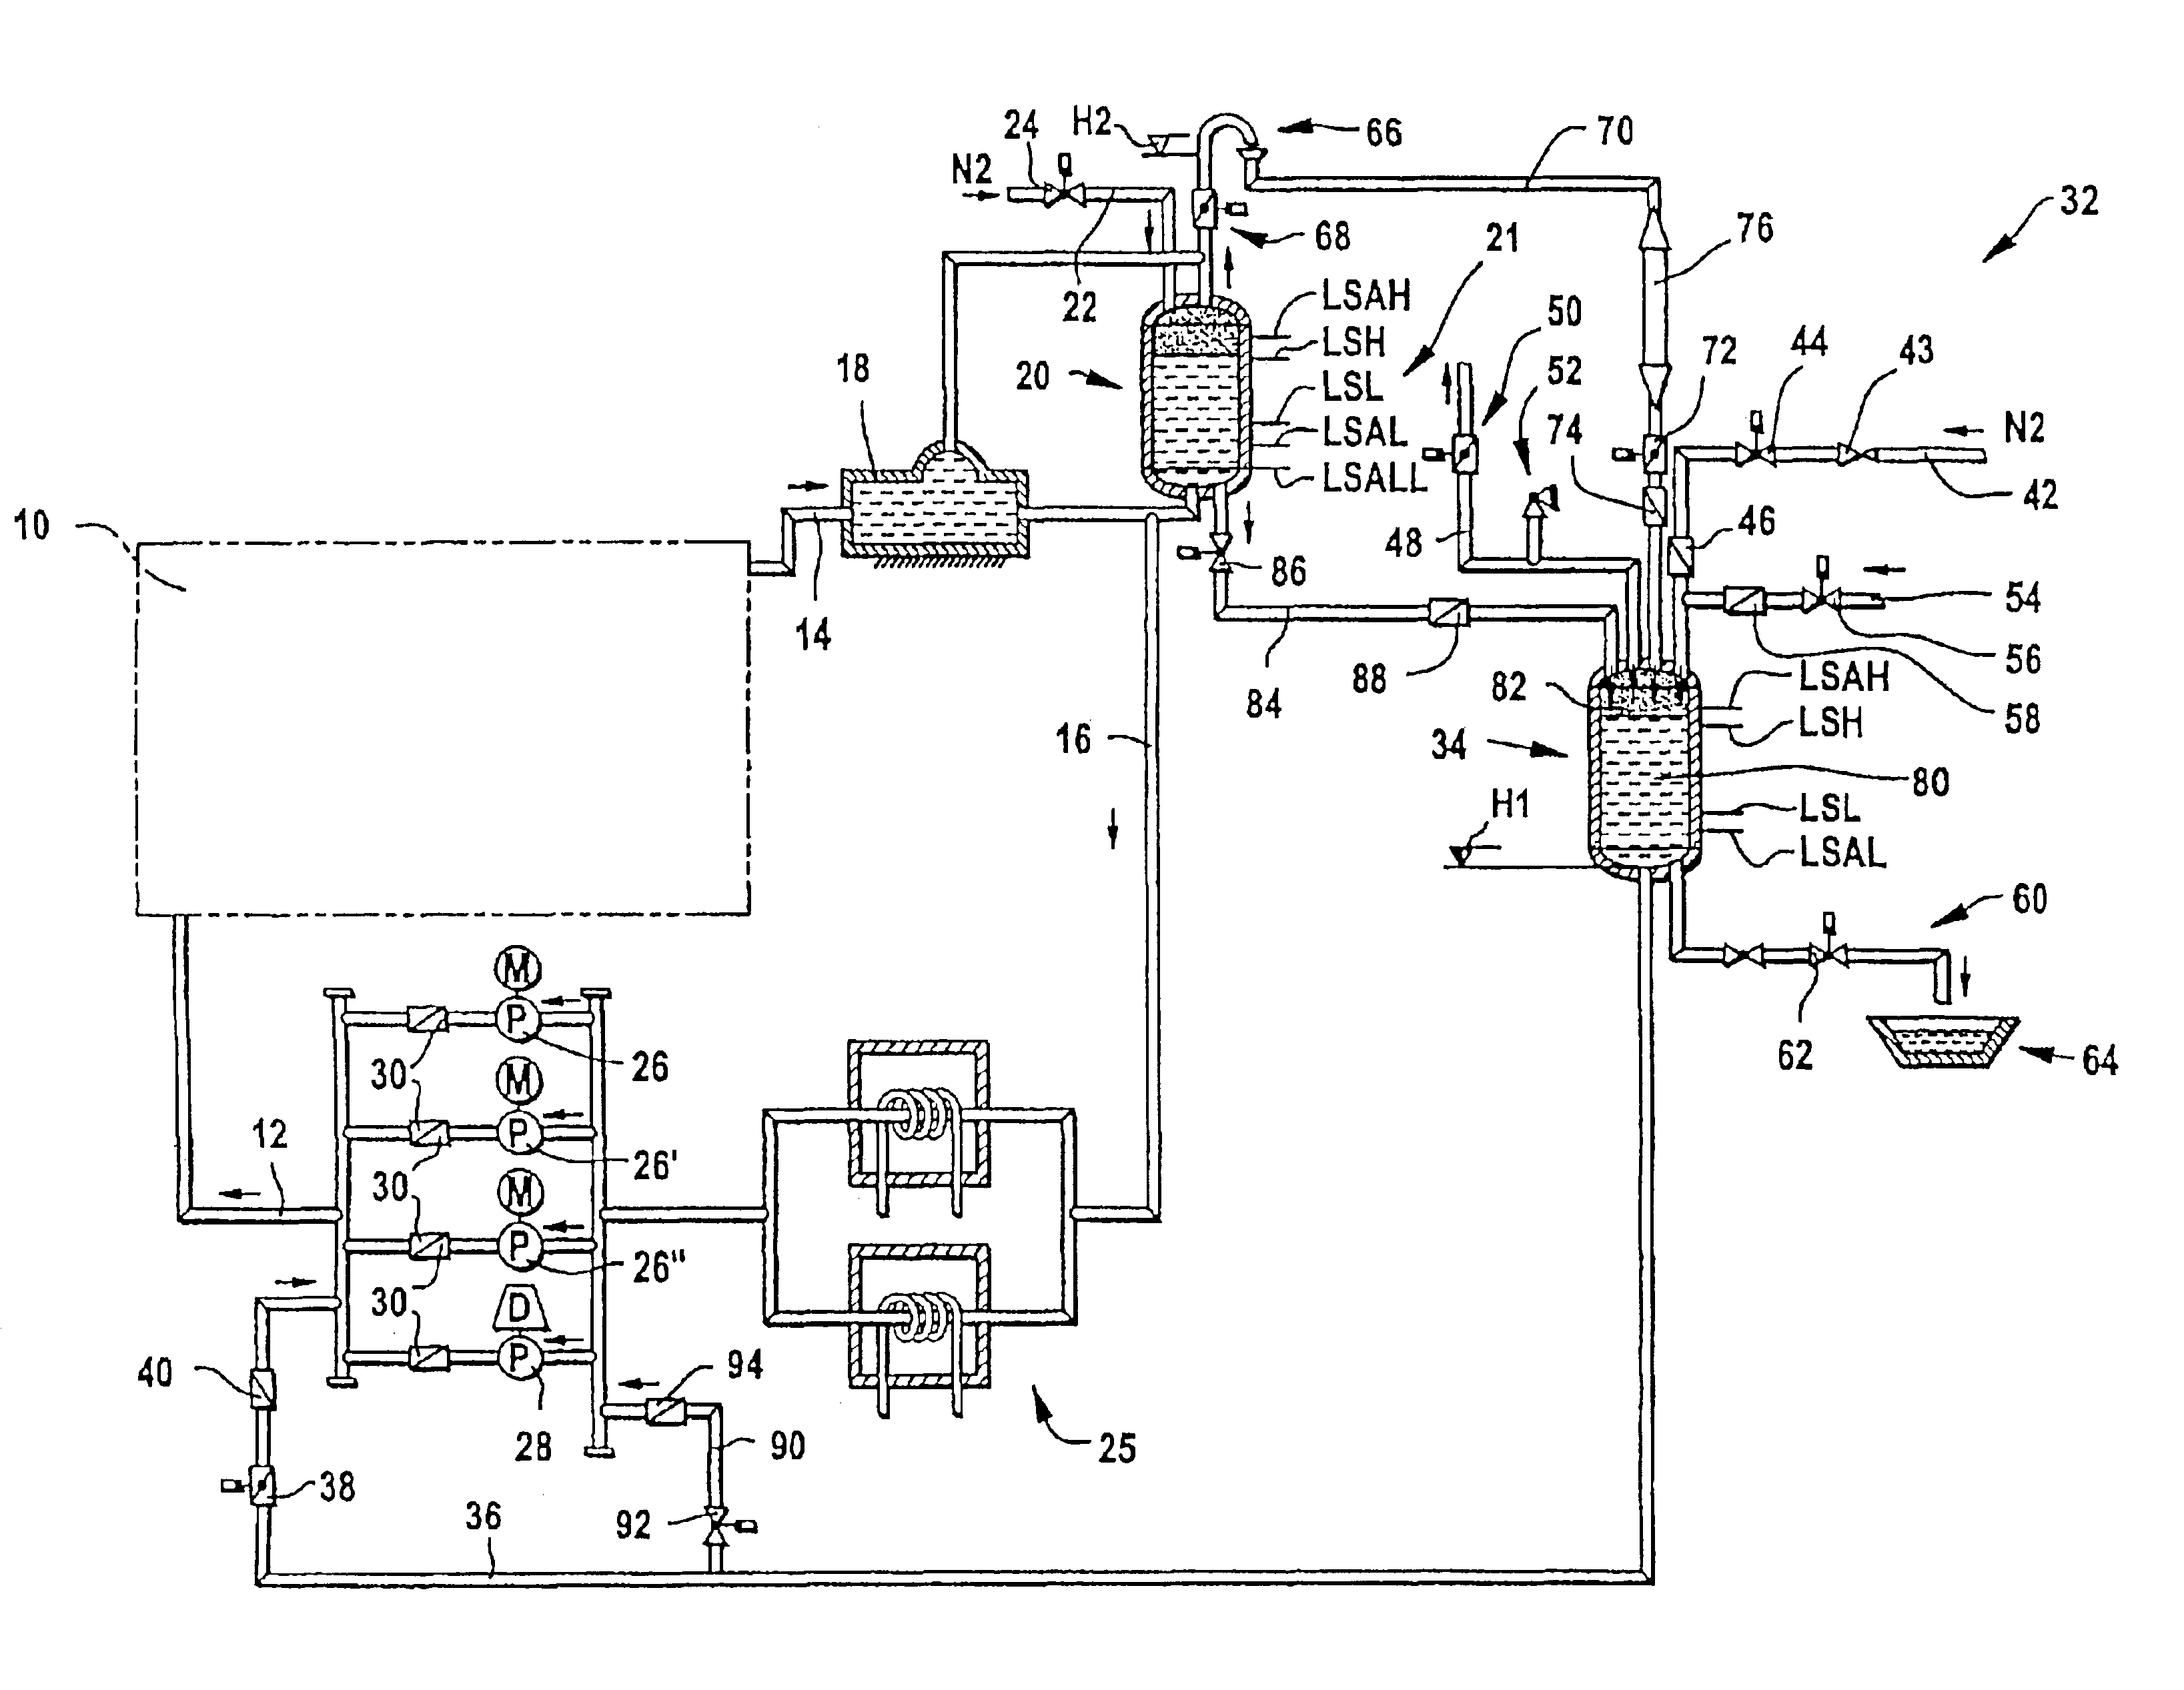 Cooling system for a metallurgical furnace